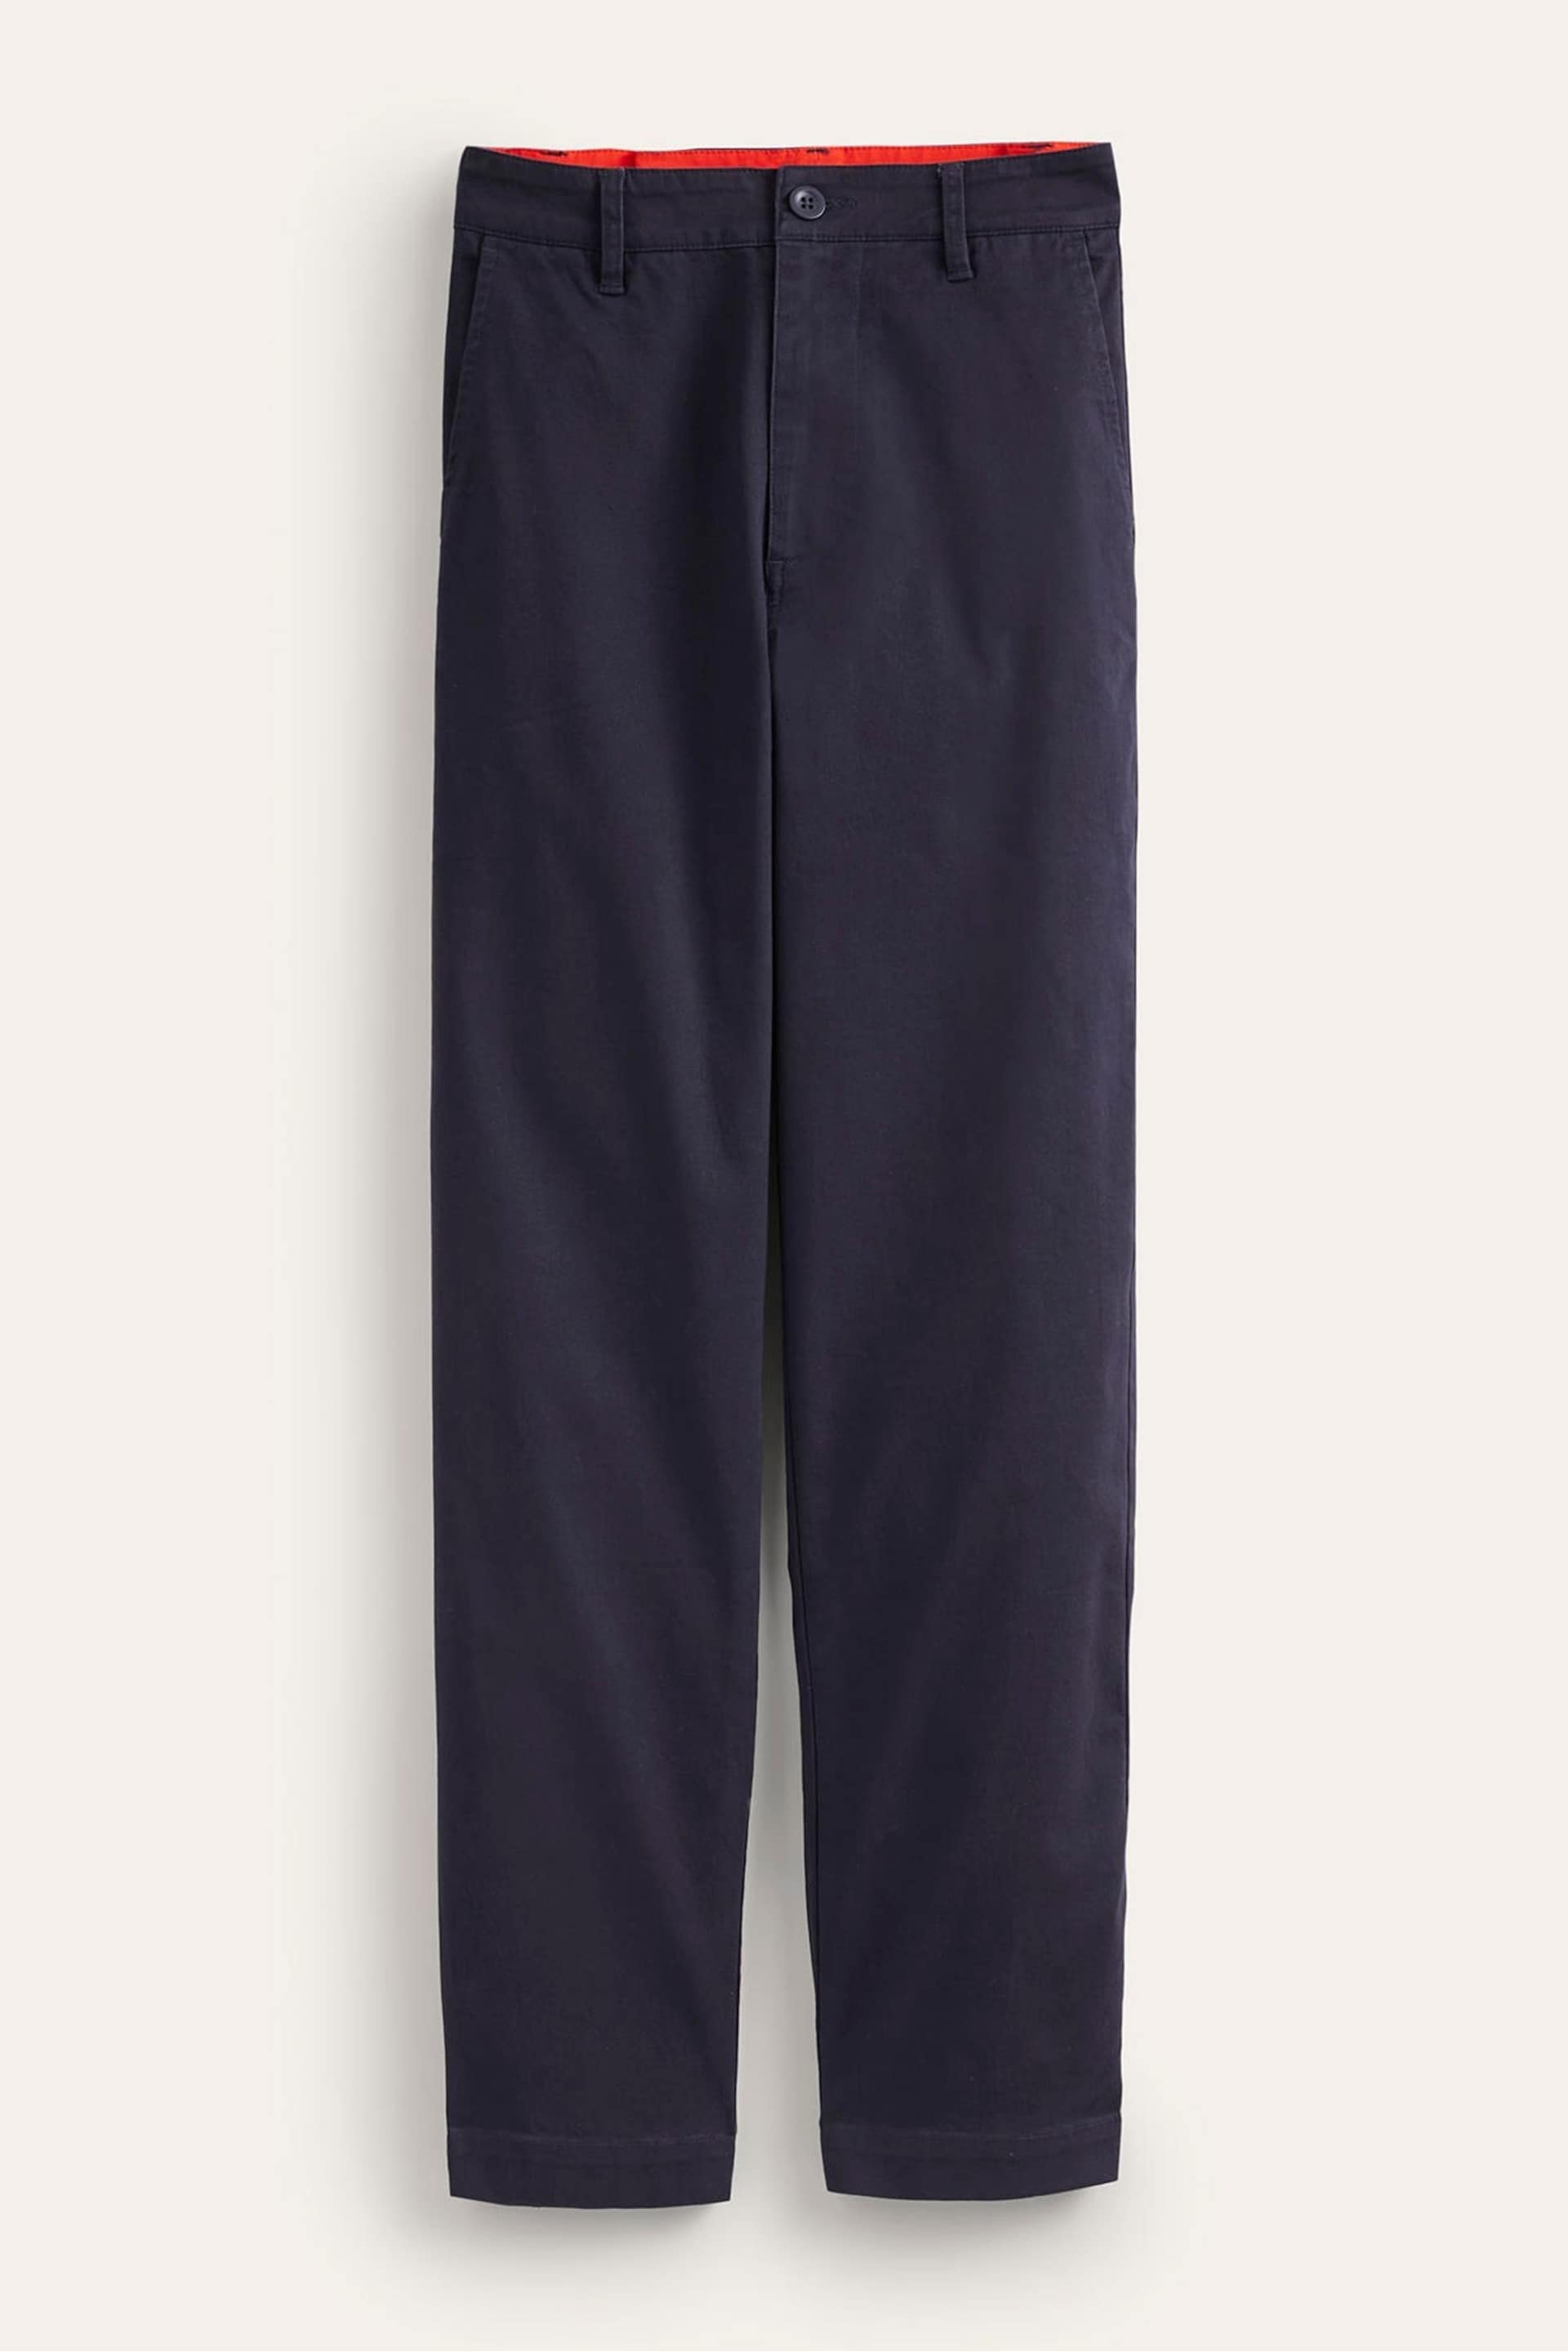 Boden Blue Petite Barnsbury Chino Trousers - Image 1 of 3